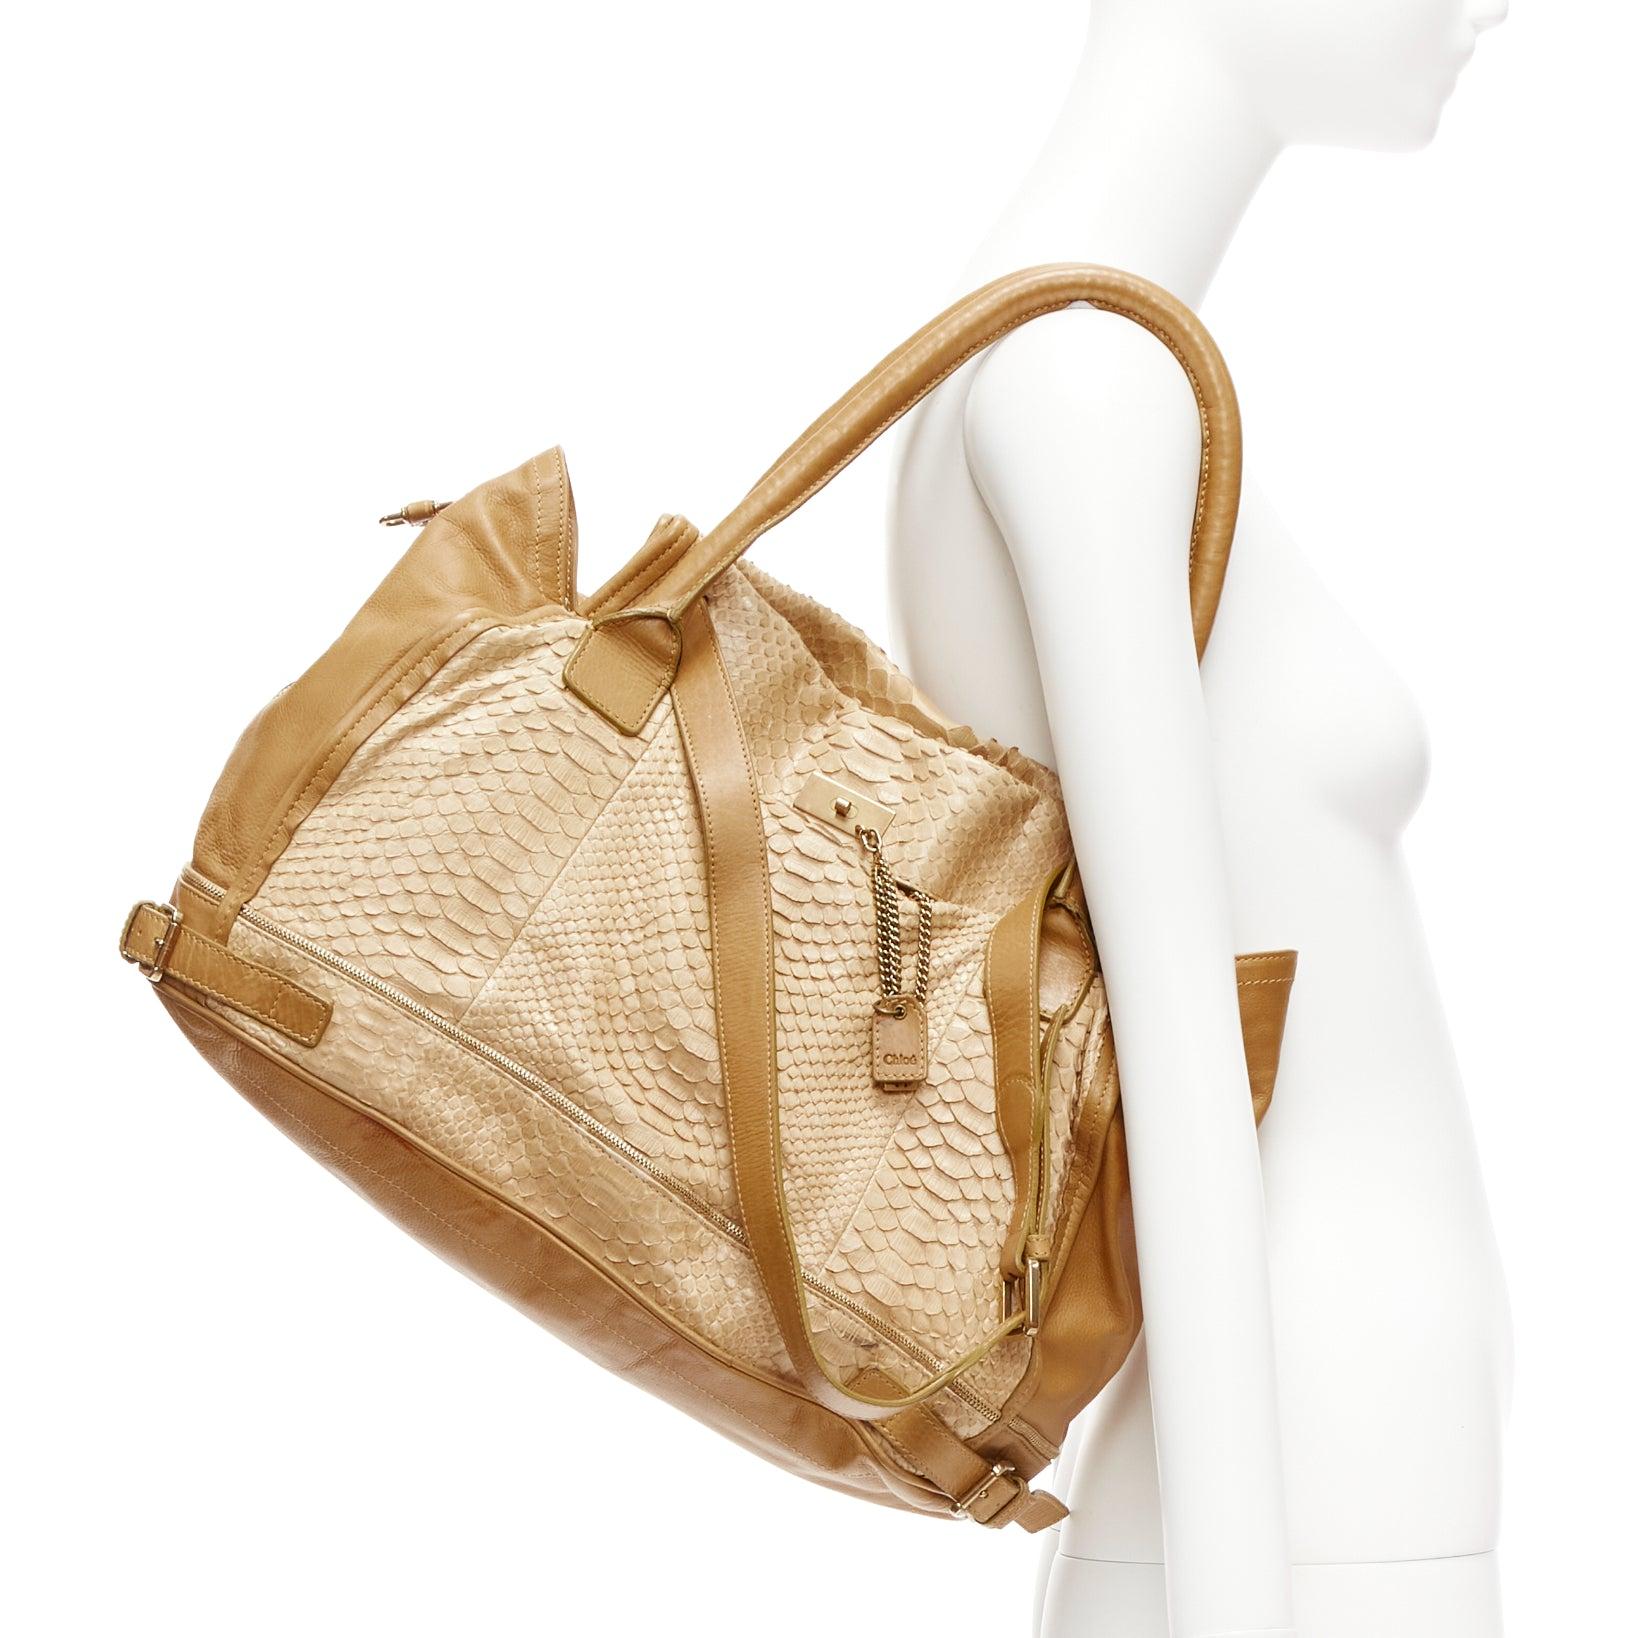 CHLOE Marlow Dune tan scaled leather logo army tag belted top handle bag
Reference: CELG/A00405
Brand: Chloe
Model: Marlo Dune
Material: Leather
Color: Beige, Brown
Pattern: Animal Print
Closure: Zip
Lining: Grey Fabric
Extra Details: Beige python